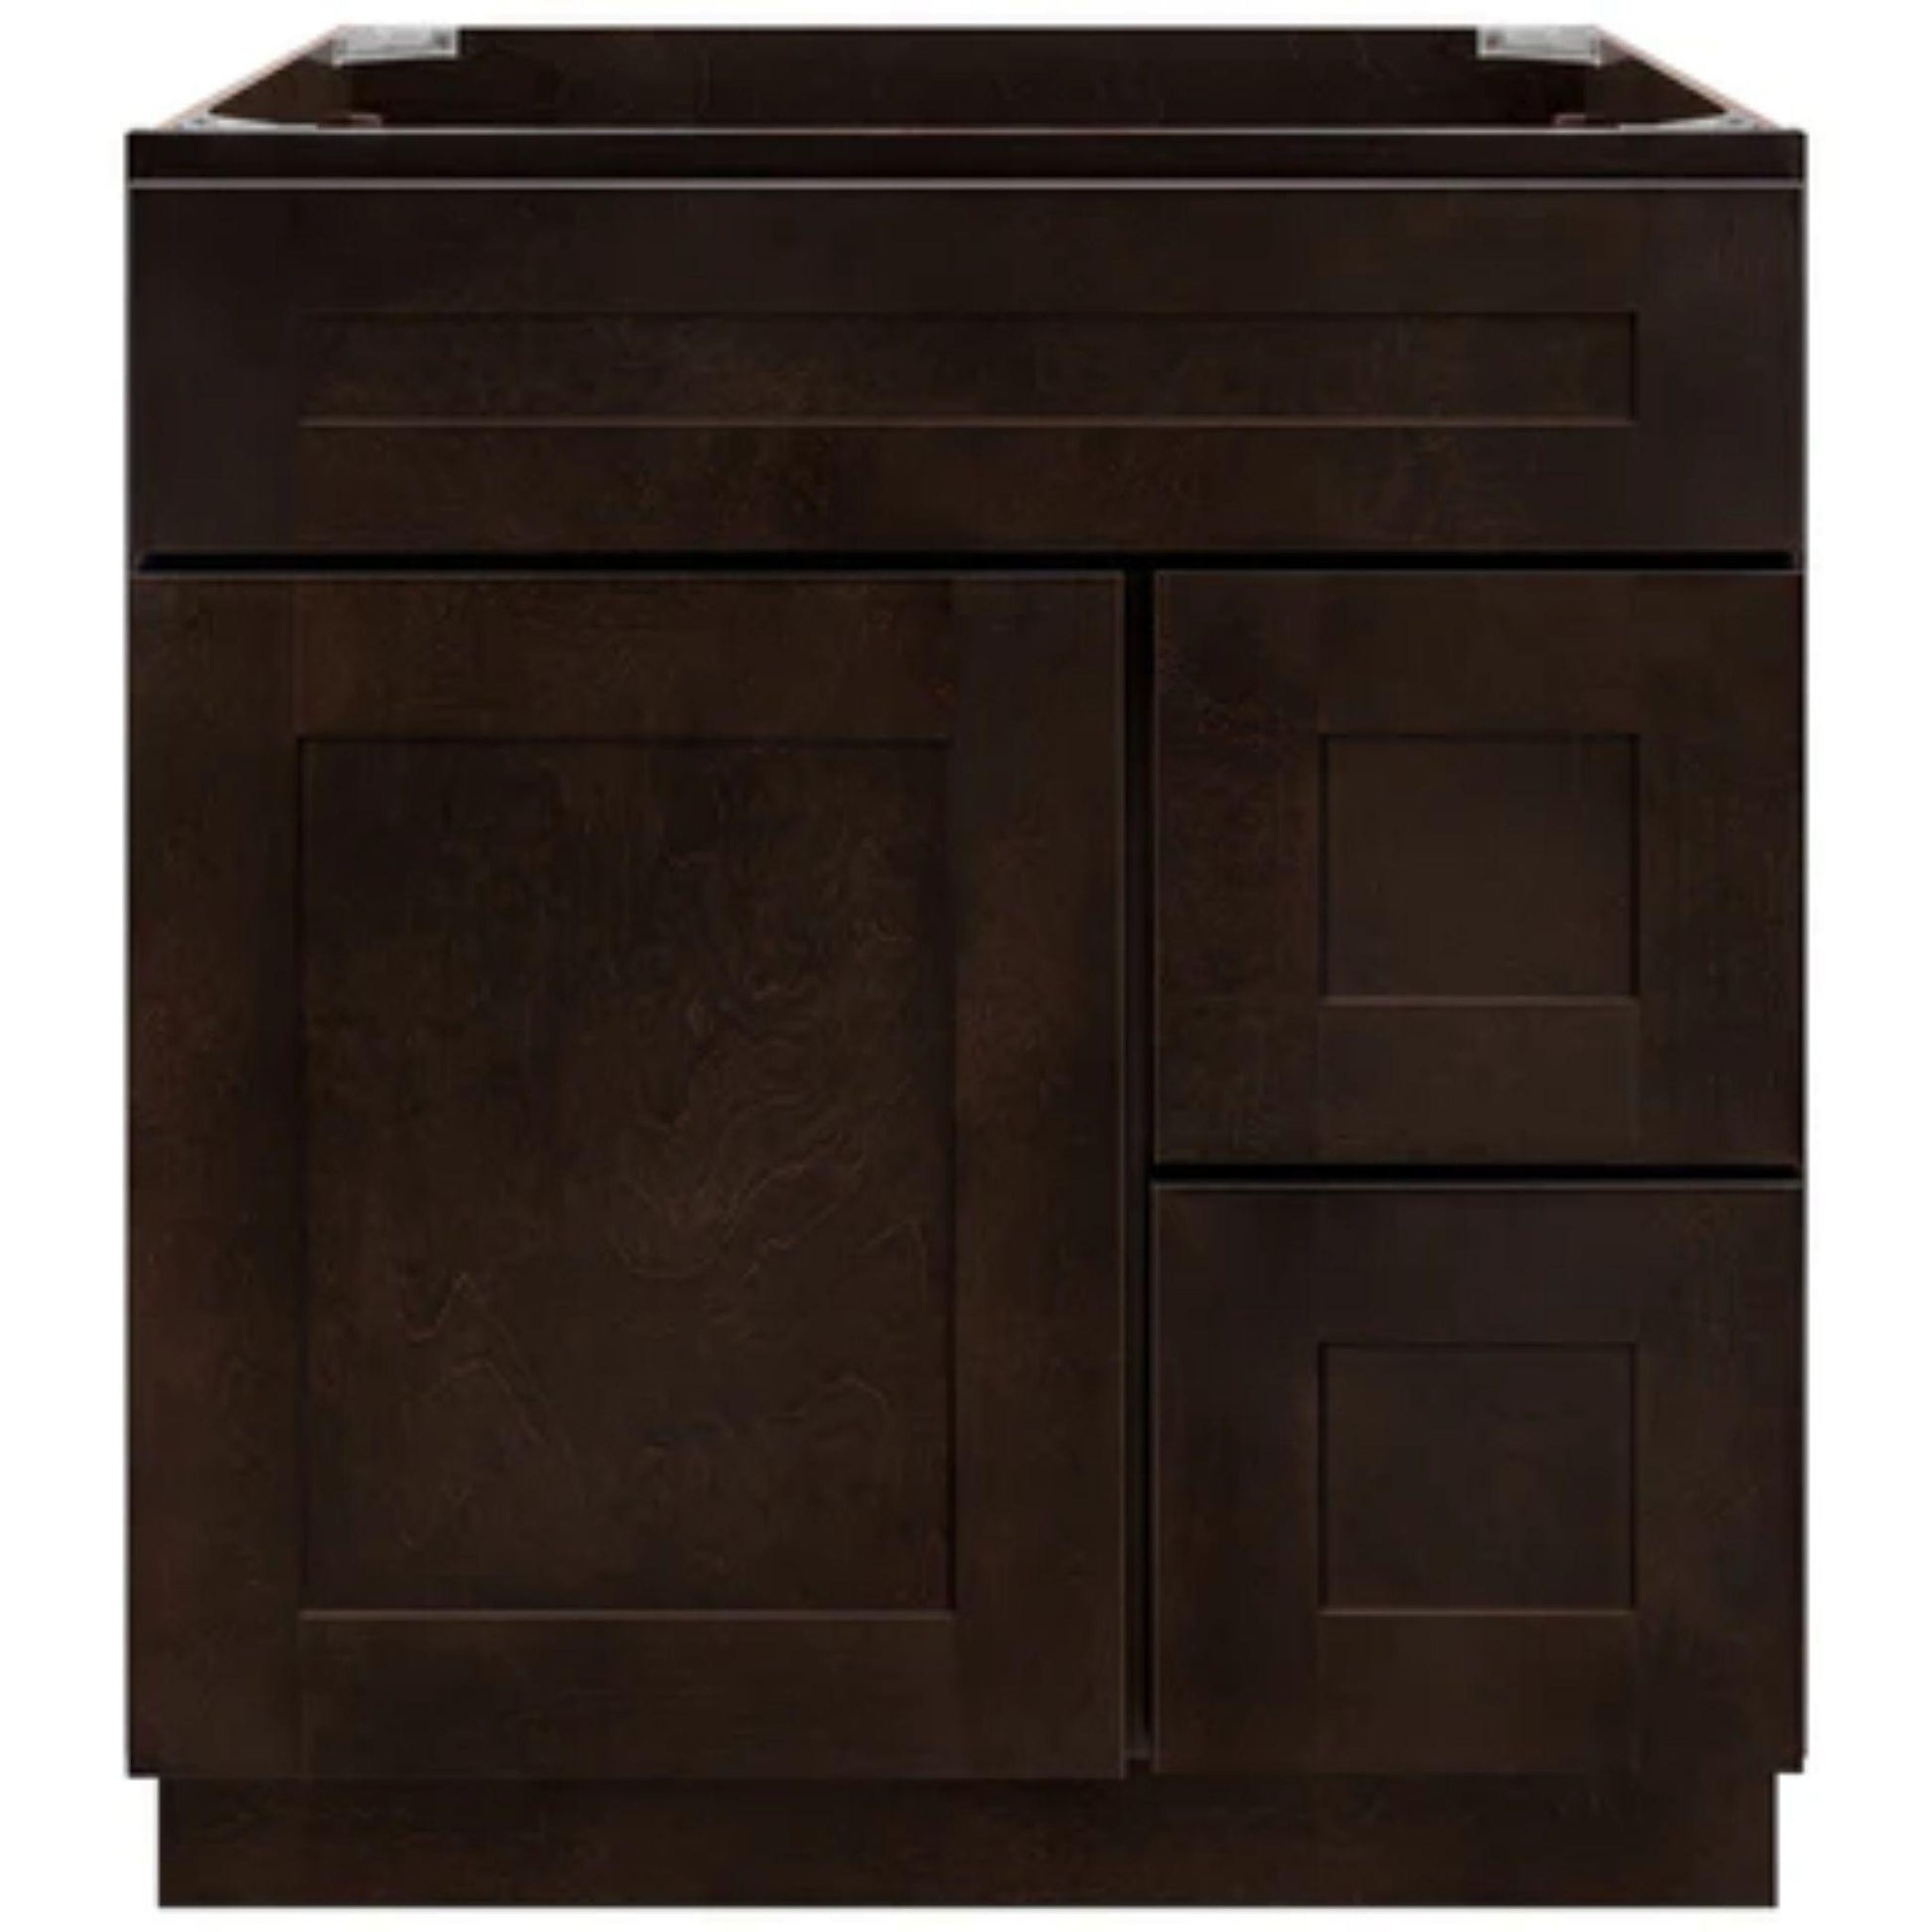 LessCare 30" x 21" x 34 1/2" Espresso Shaker Vanity Sink Base Cabinet with Right Drawers